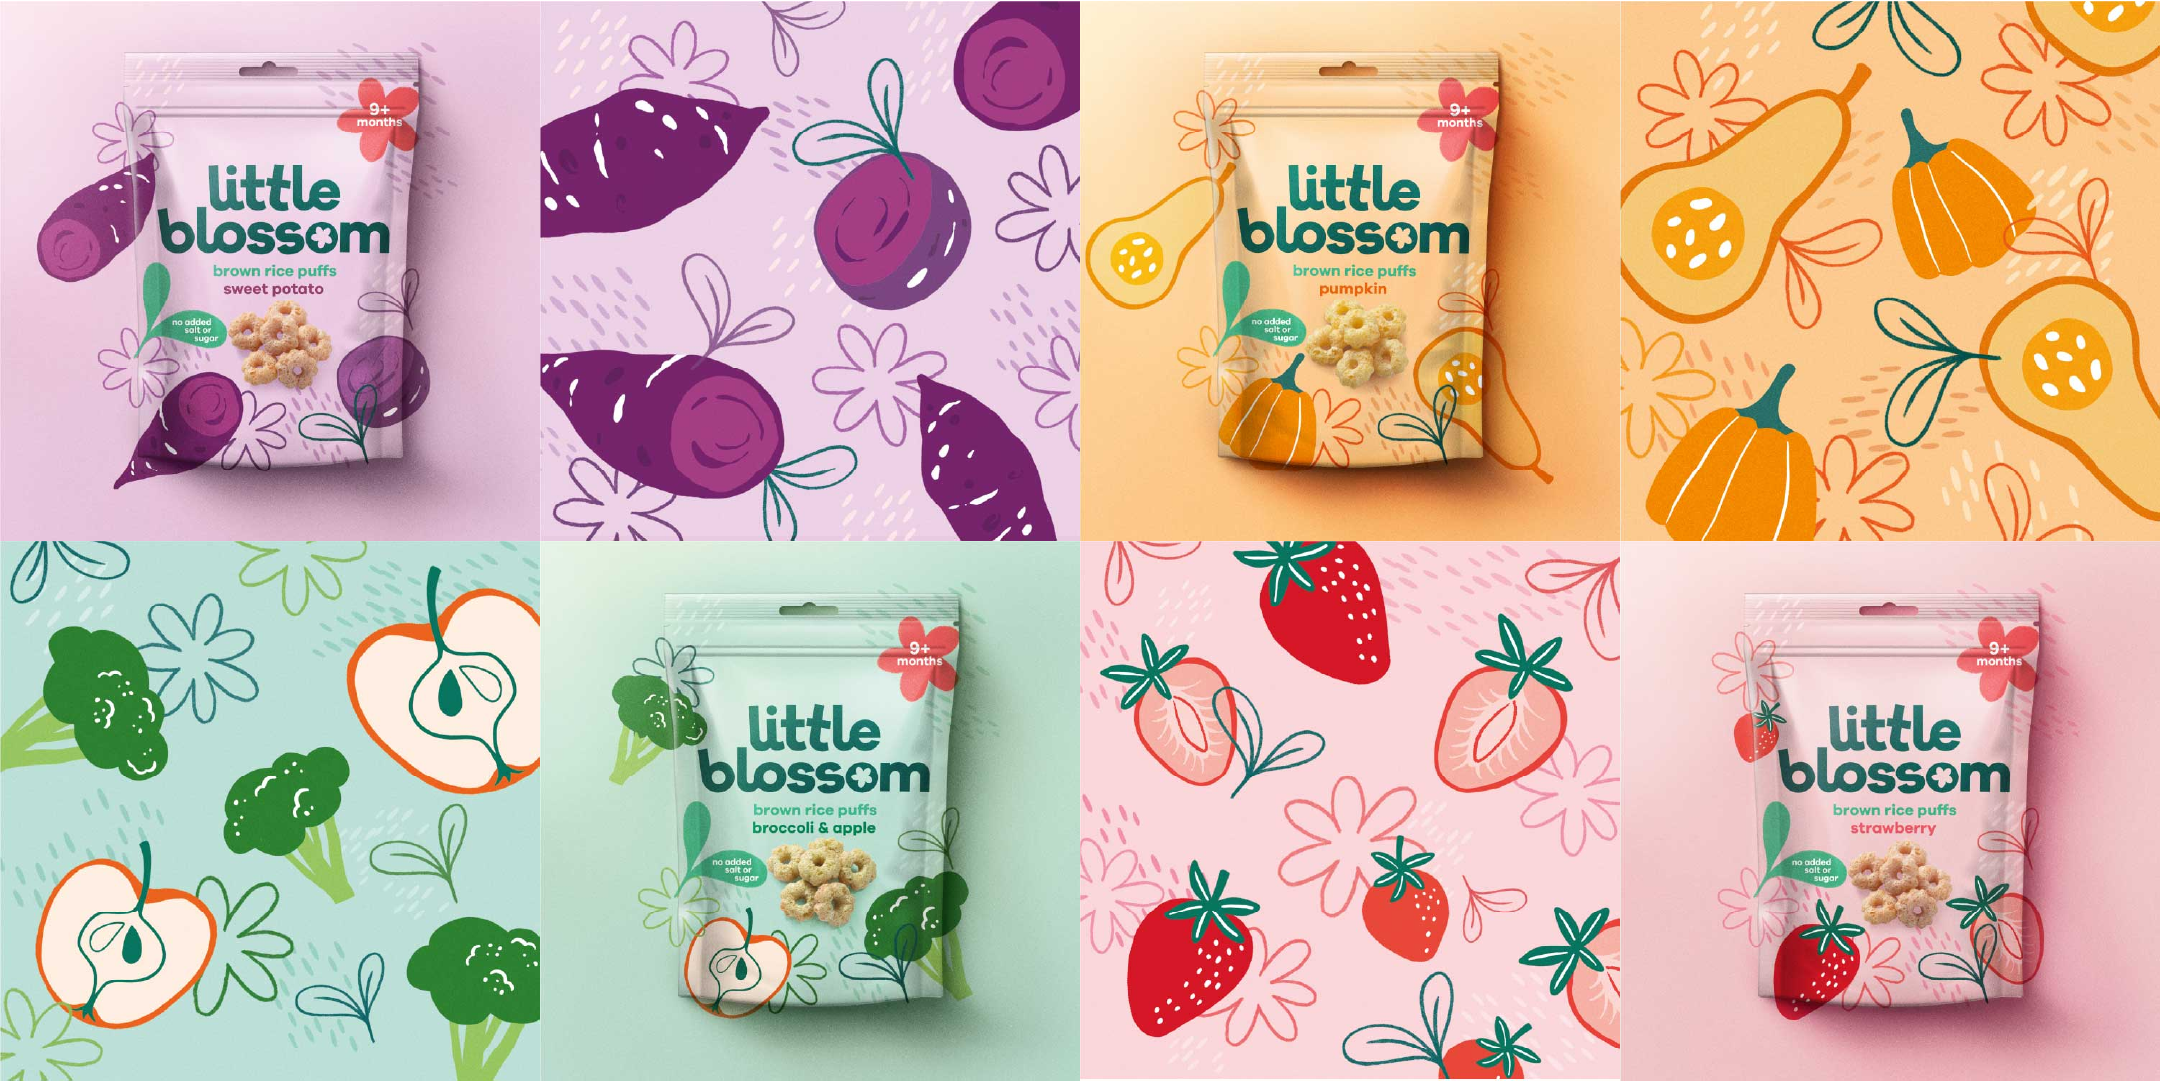 Little Blossom organic baby food assorted flavours packaging design